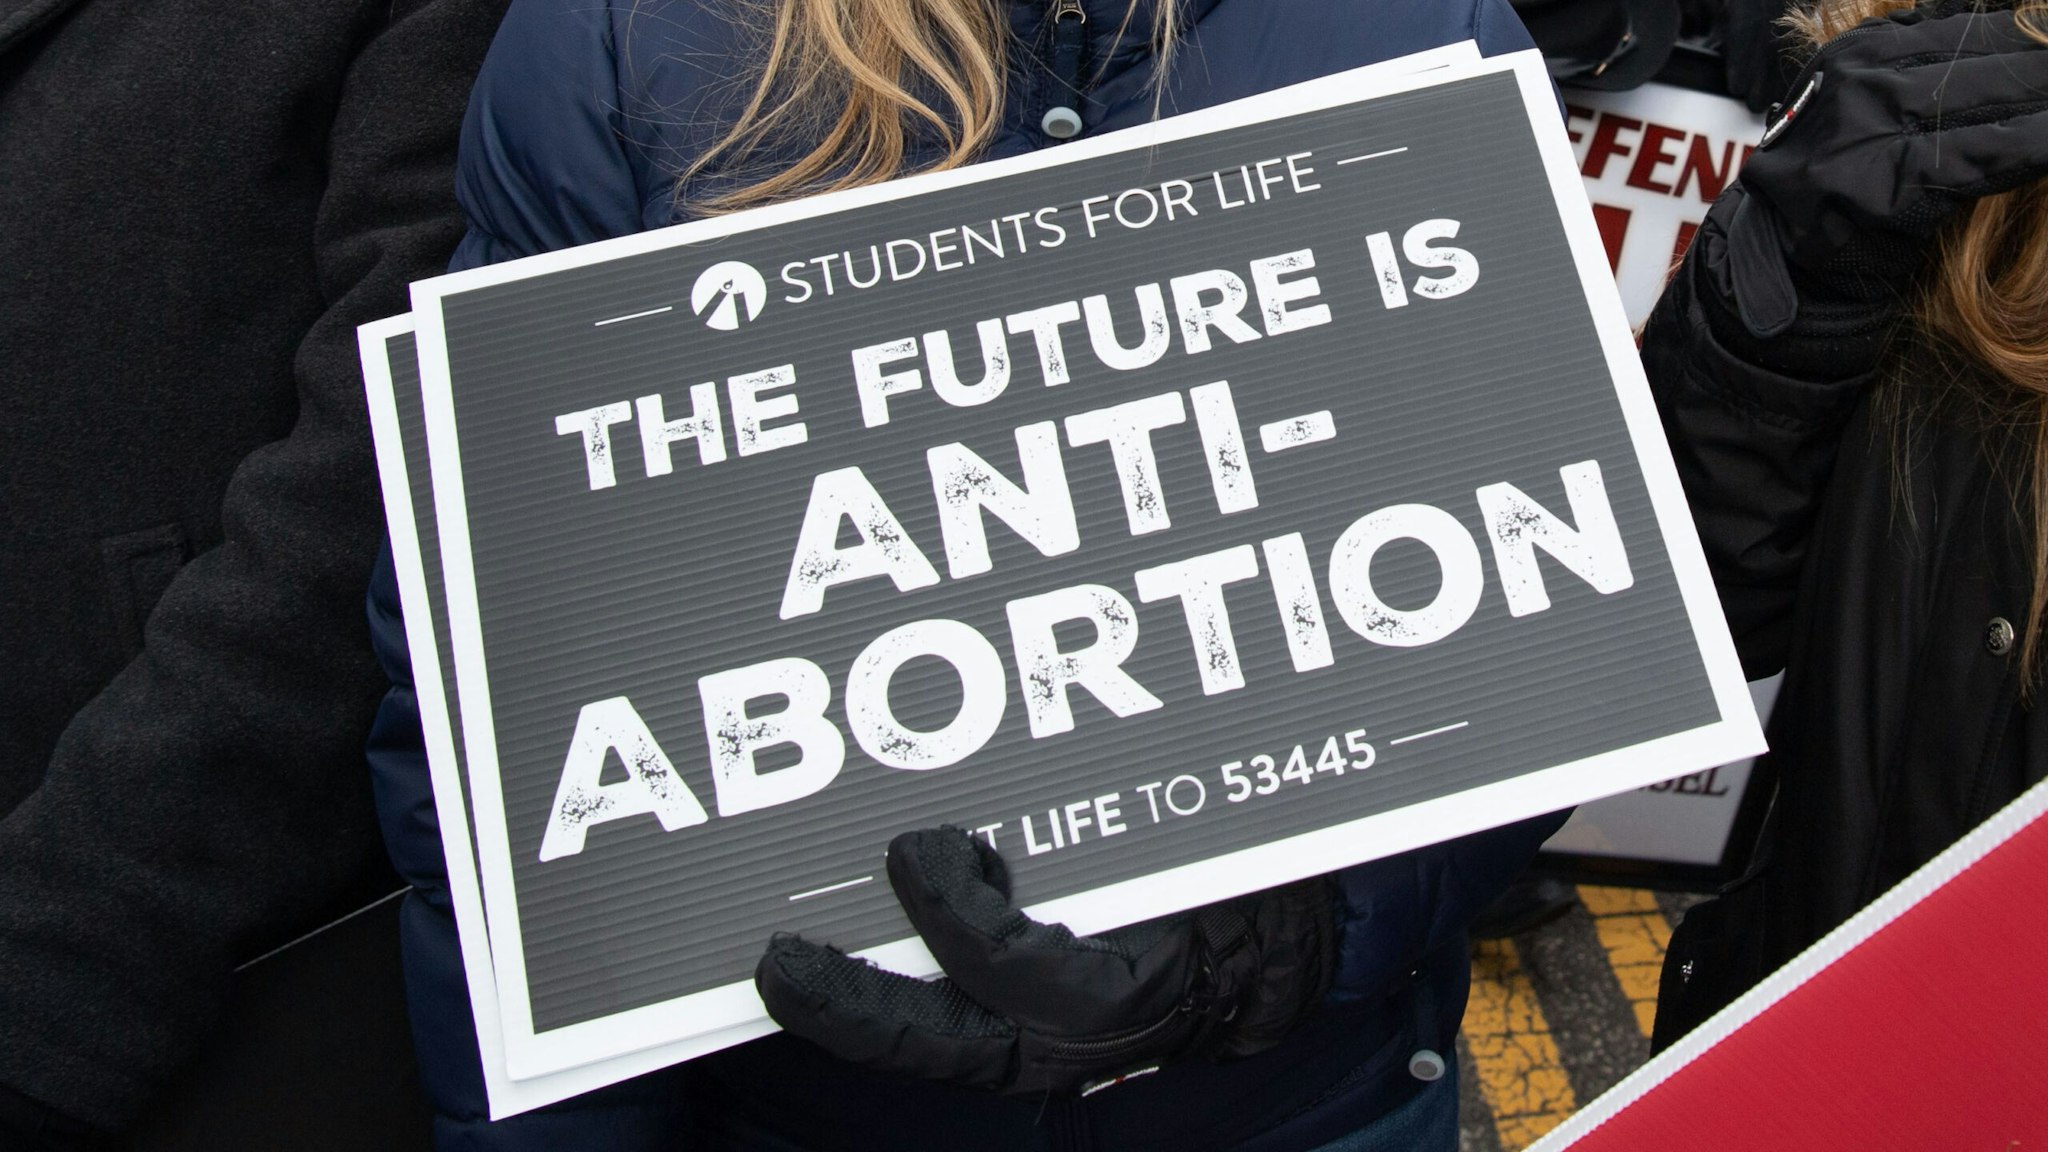 Anti-abortion activists participate in the "March for Life," an annual event to mark the anniversary of the 1973 Supreme Court case Roe v. Wade, which legalized abortion in the US, outside the US Supreme Court in Washington, DC, January 29, 2021.